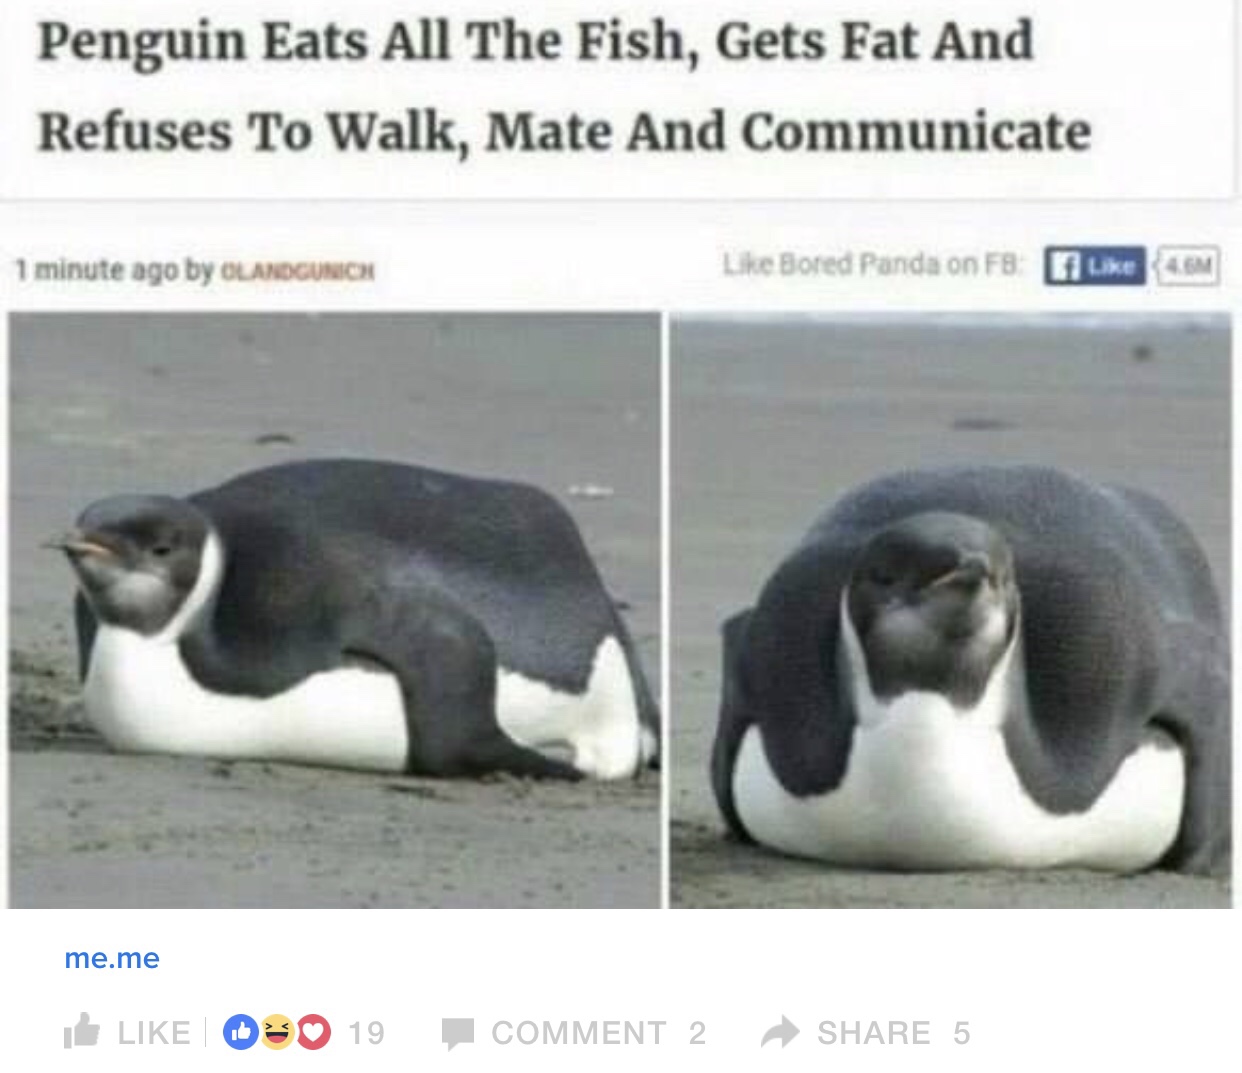 meme - penguin eats all the fish gets fat - Penguin Eats All The Fish, Gets Fat And Refuses To Walk, Mate And Communicate 1 minute ago by Olandgunich Bored Panda on F8 . me.me I 19 Comment 2 5